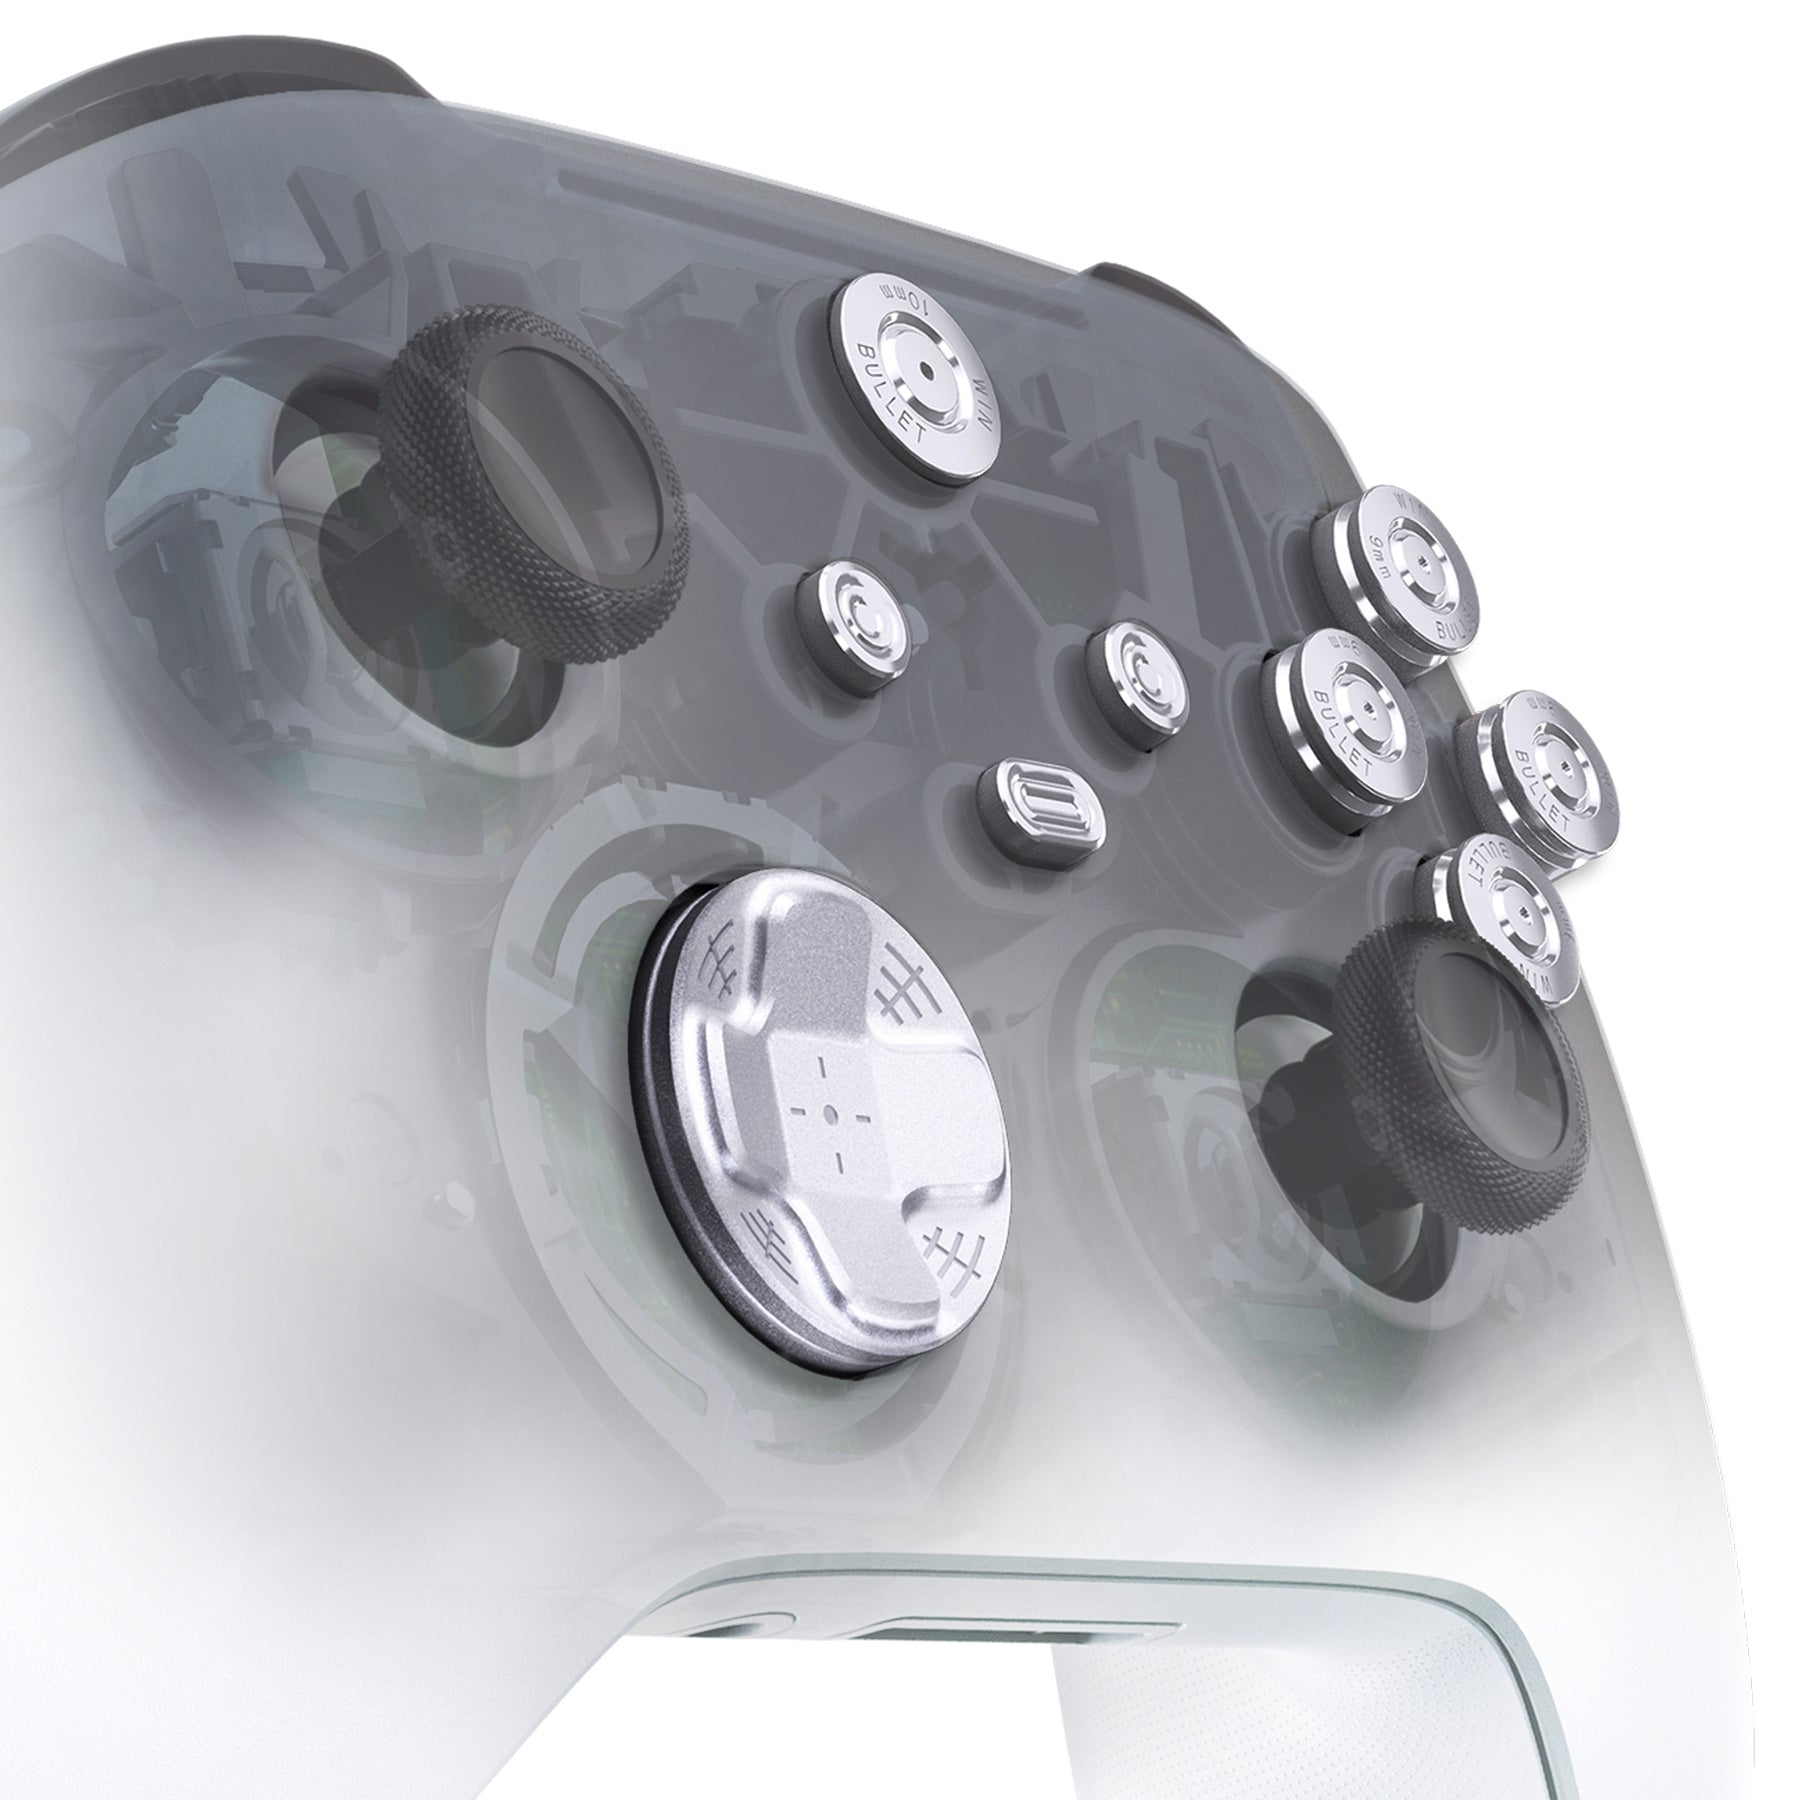  Controller Bullet Buttons for Xbox One Series X S - Made Using  Real 9MM Spent Bullet Casings - Includes Tools : Video Games